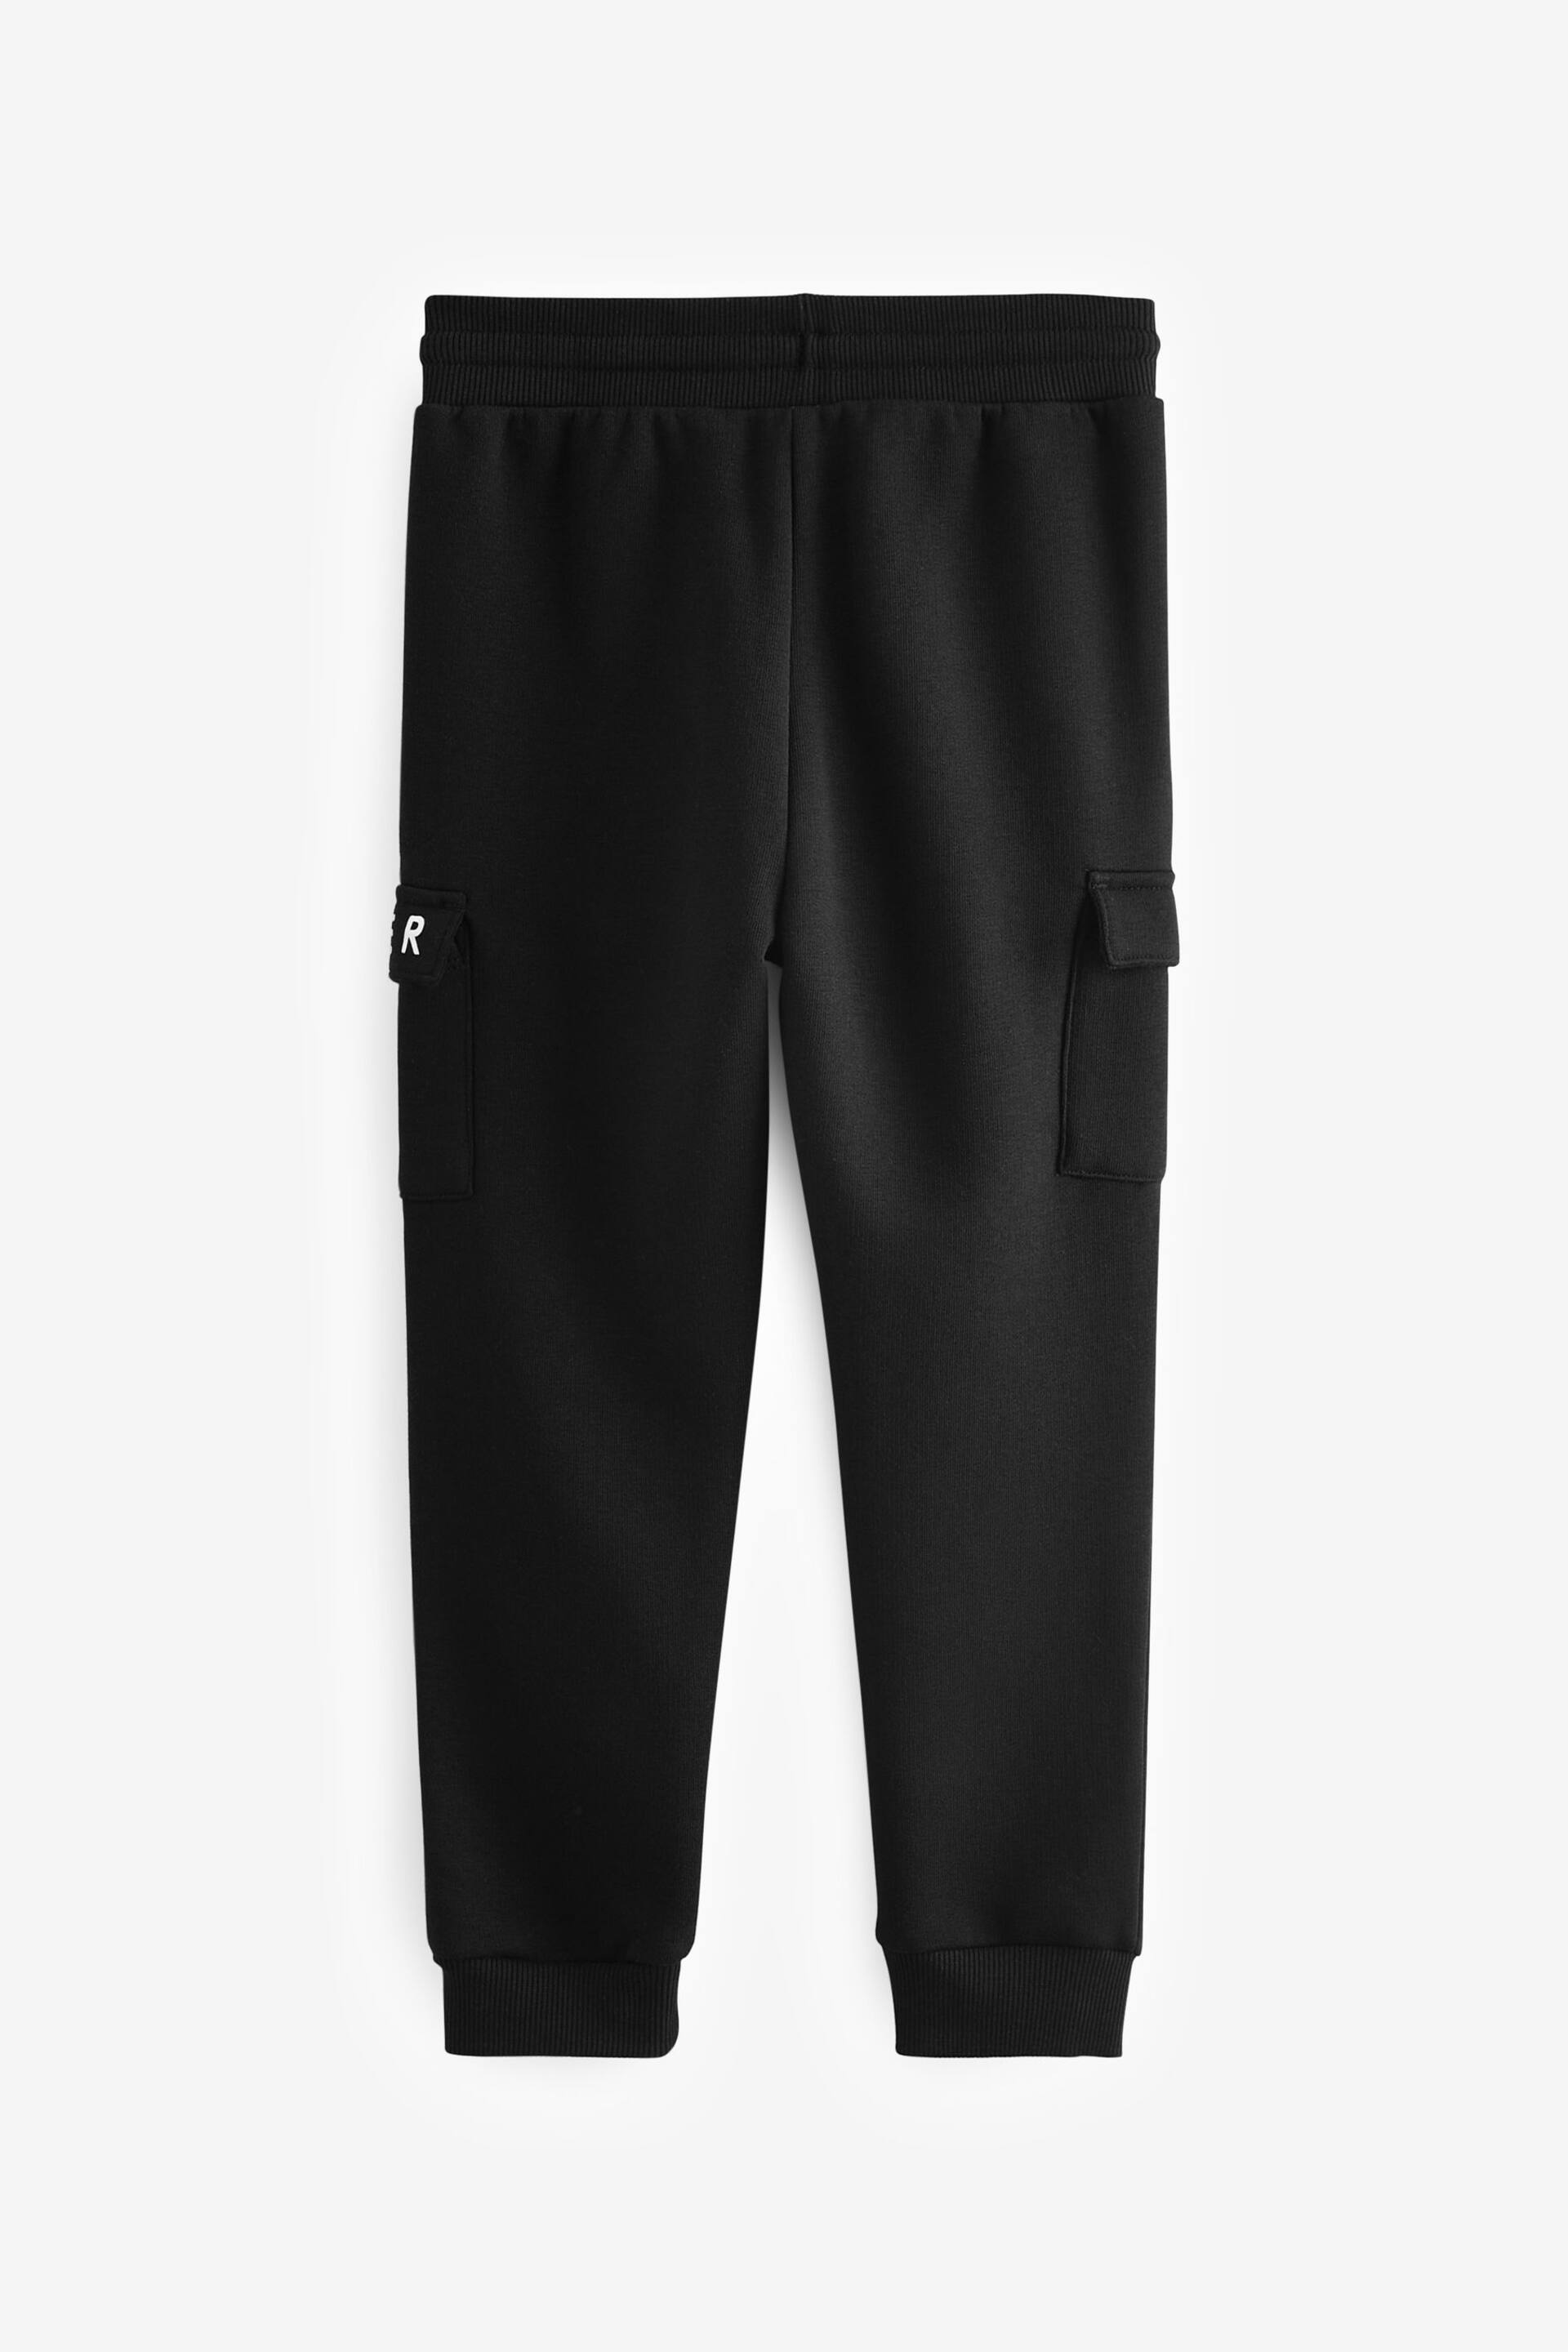 Baker by Ted Baker Cargo Joggers - Image 5 of 7